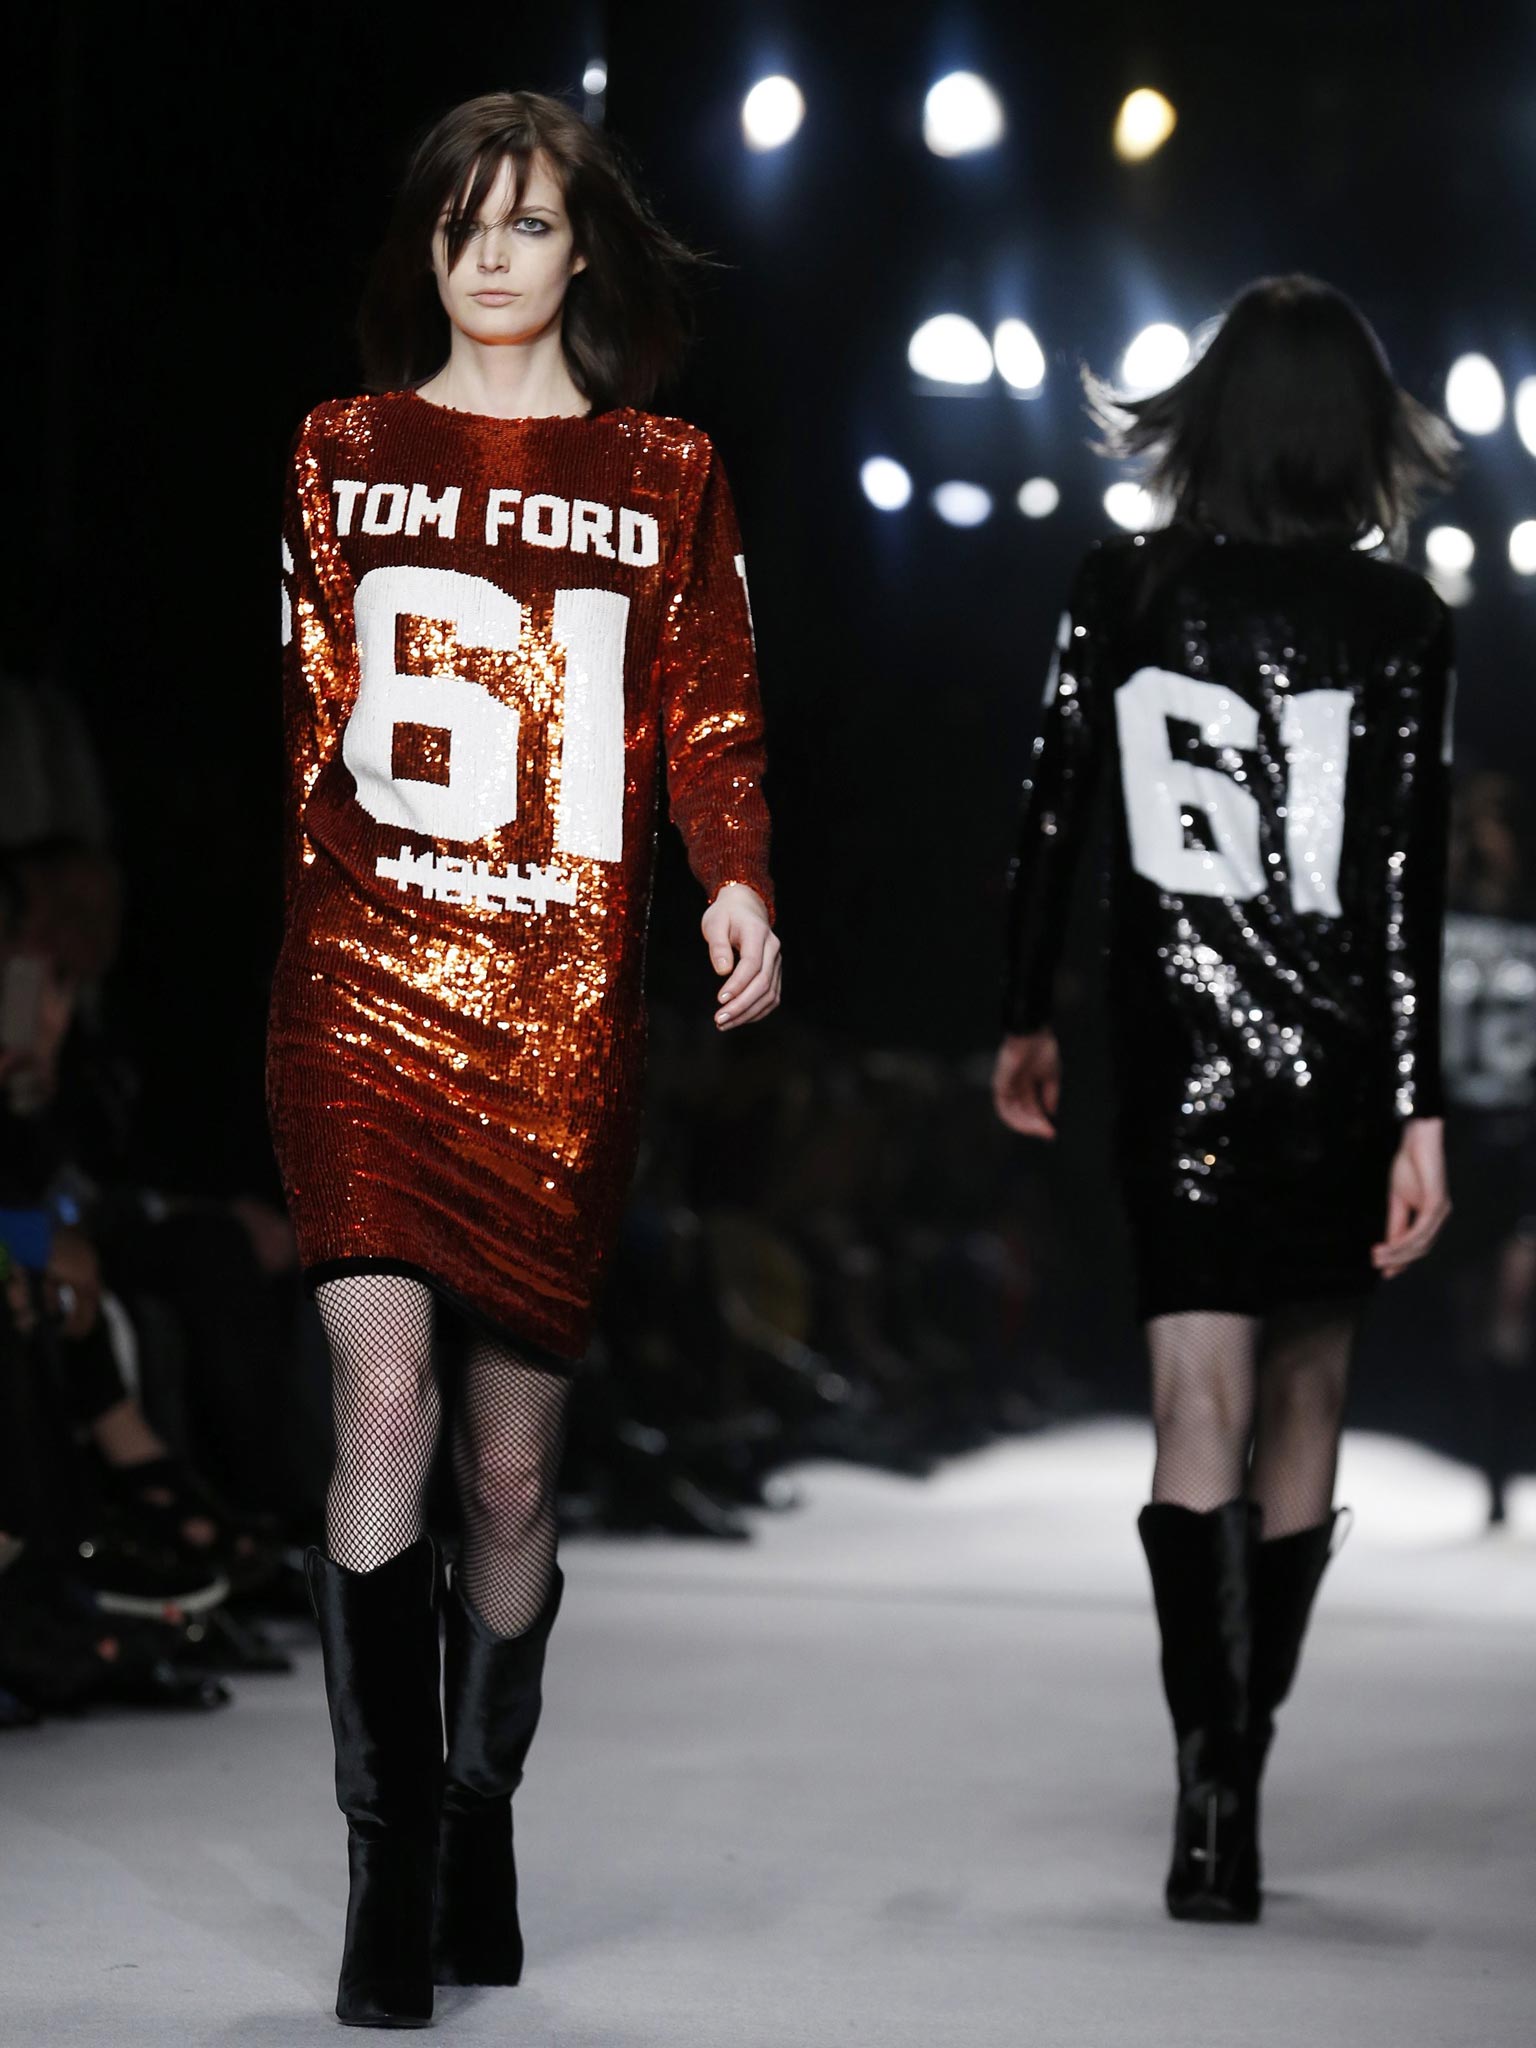 Tom Ford’s creations showed there is no mistaking him for anything other than American